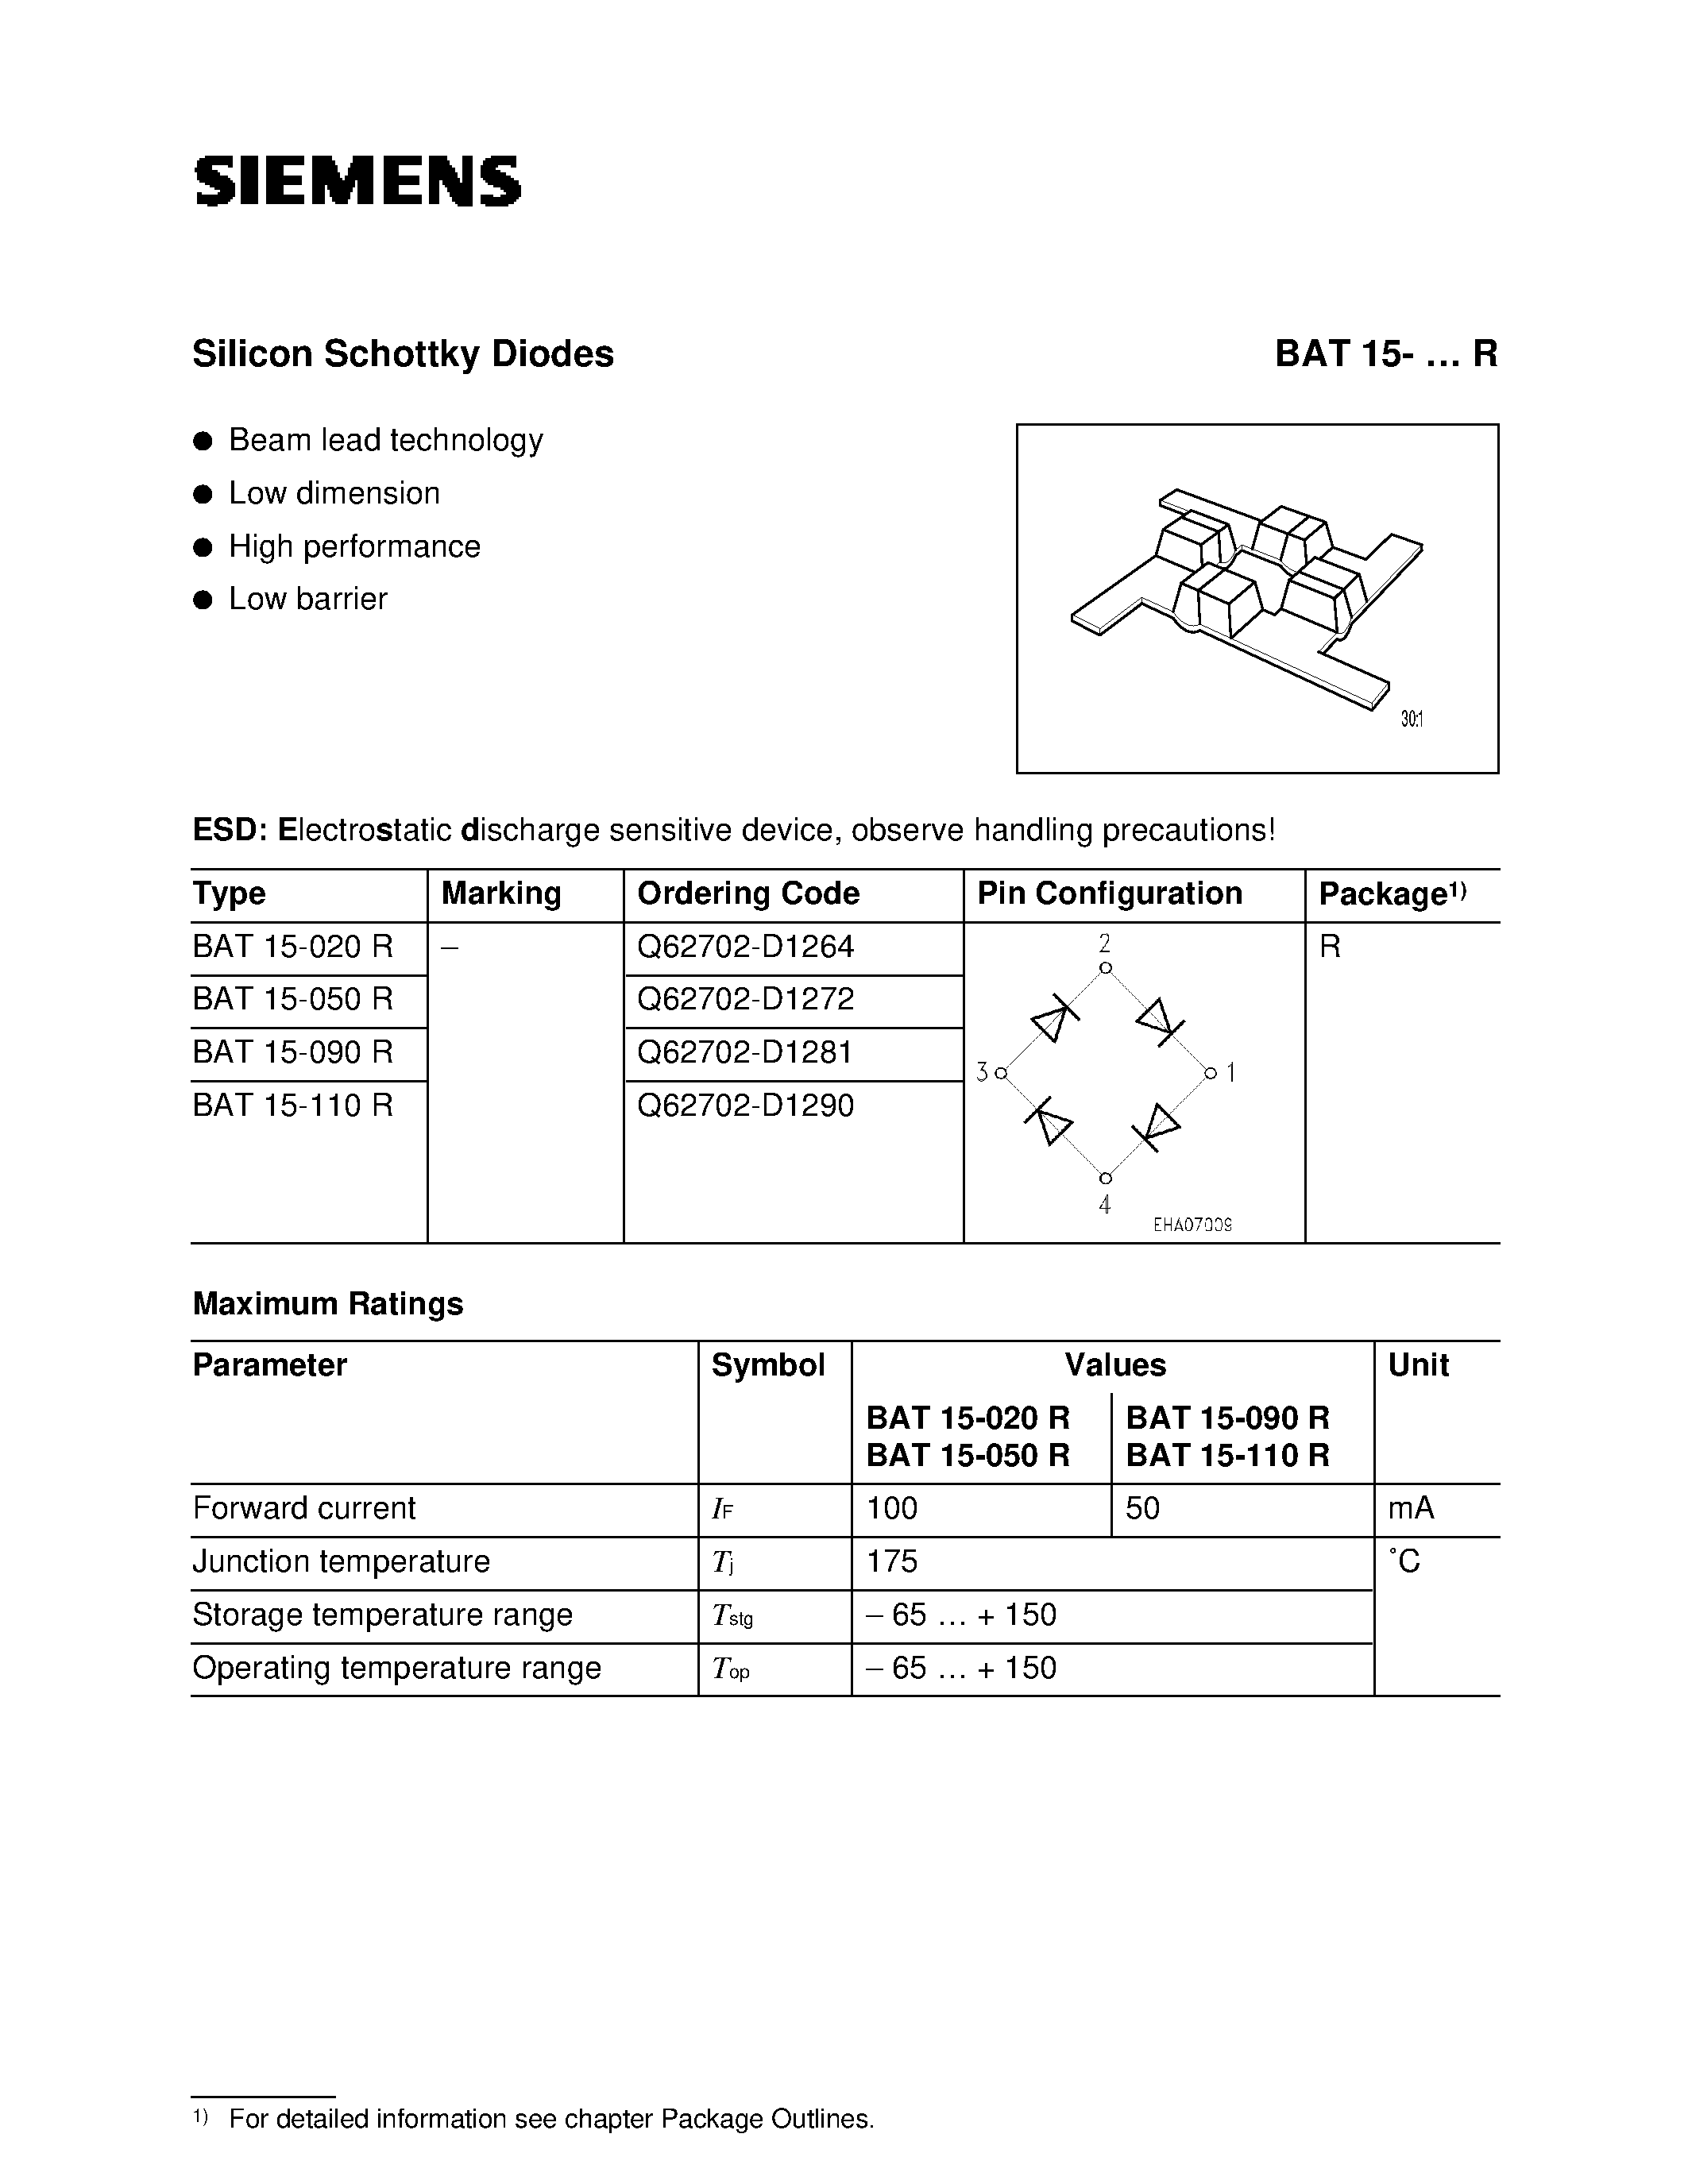 Datasheet BAT15-050R - Silicon Schottky Diodes (Beam lead technology Low dimension High performance Low barrier) page 1